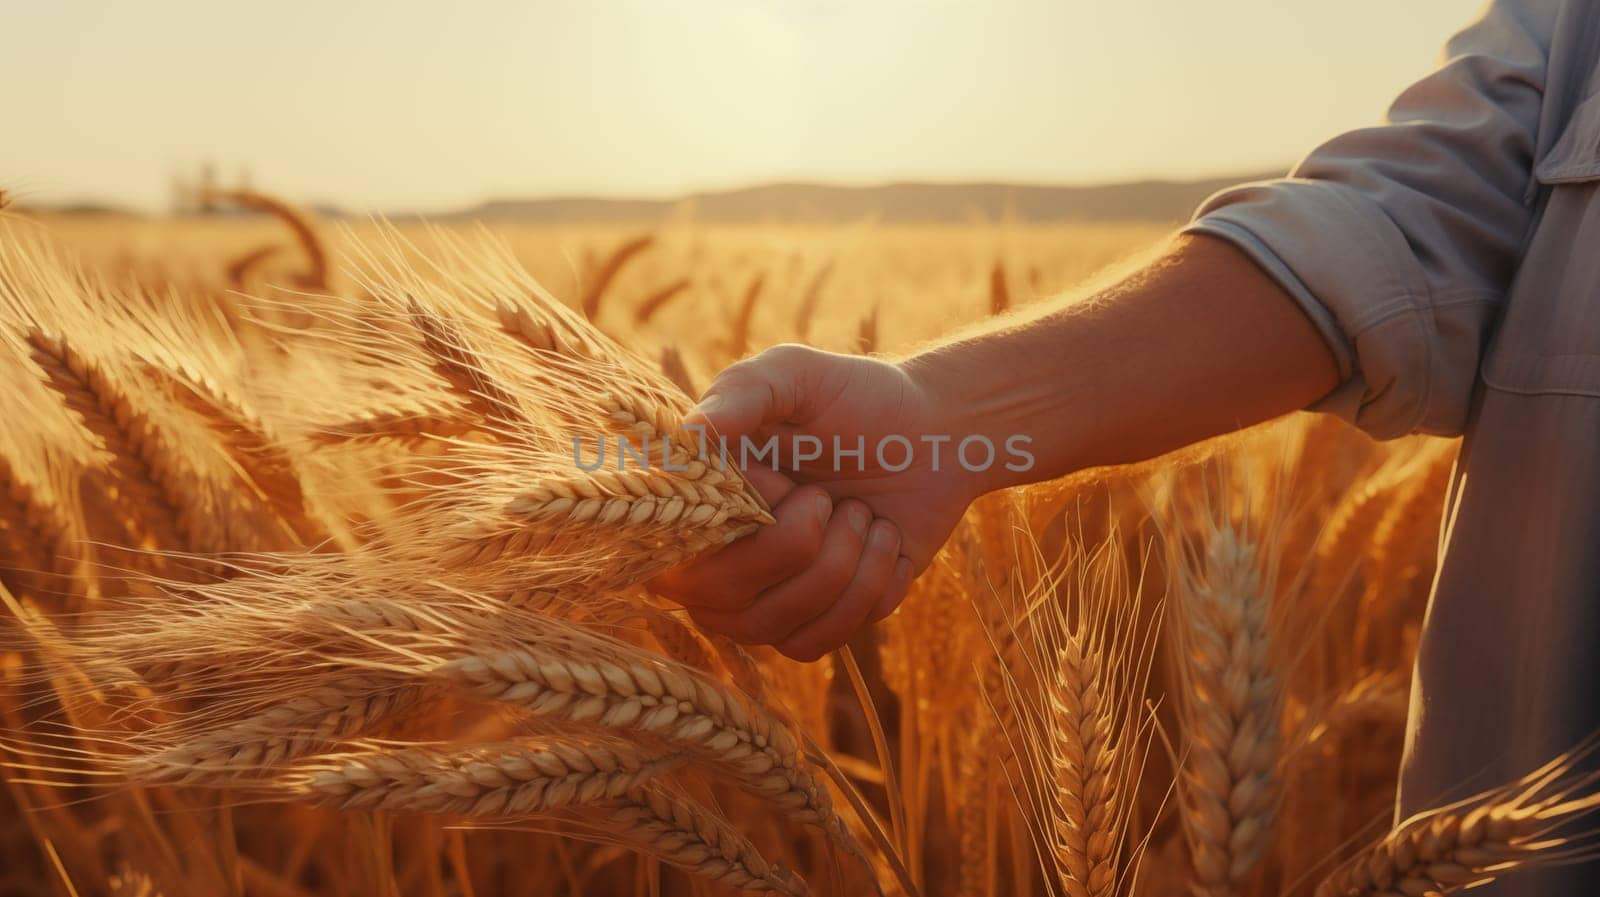 Farmer's hand with spikelets of ripe wheat against the background of a field with golden wheat. Close up